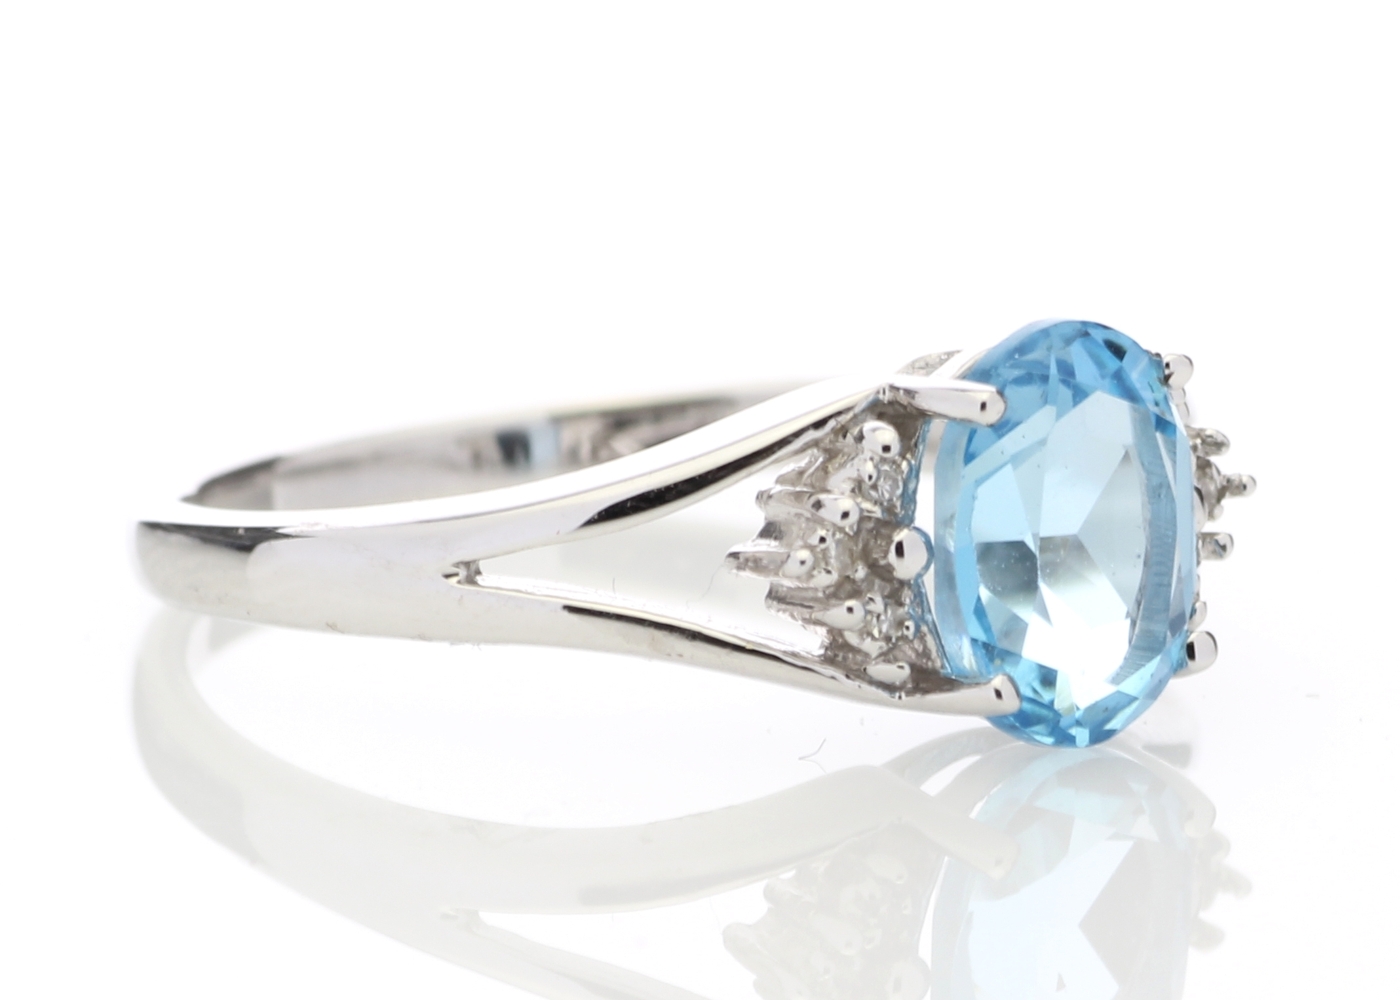 9ct White Gold Diamond And Blue Topaz Ring - Image 4 of 6